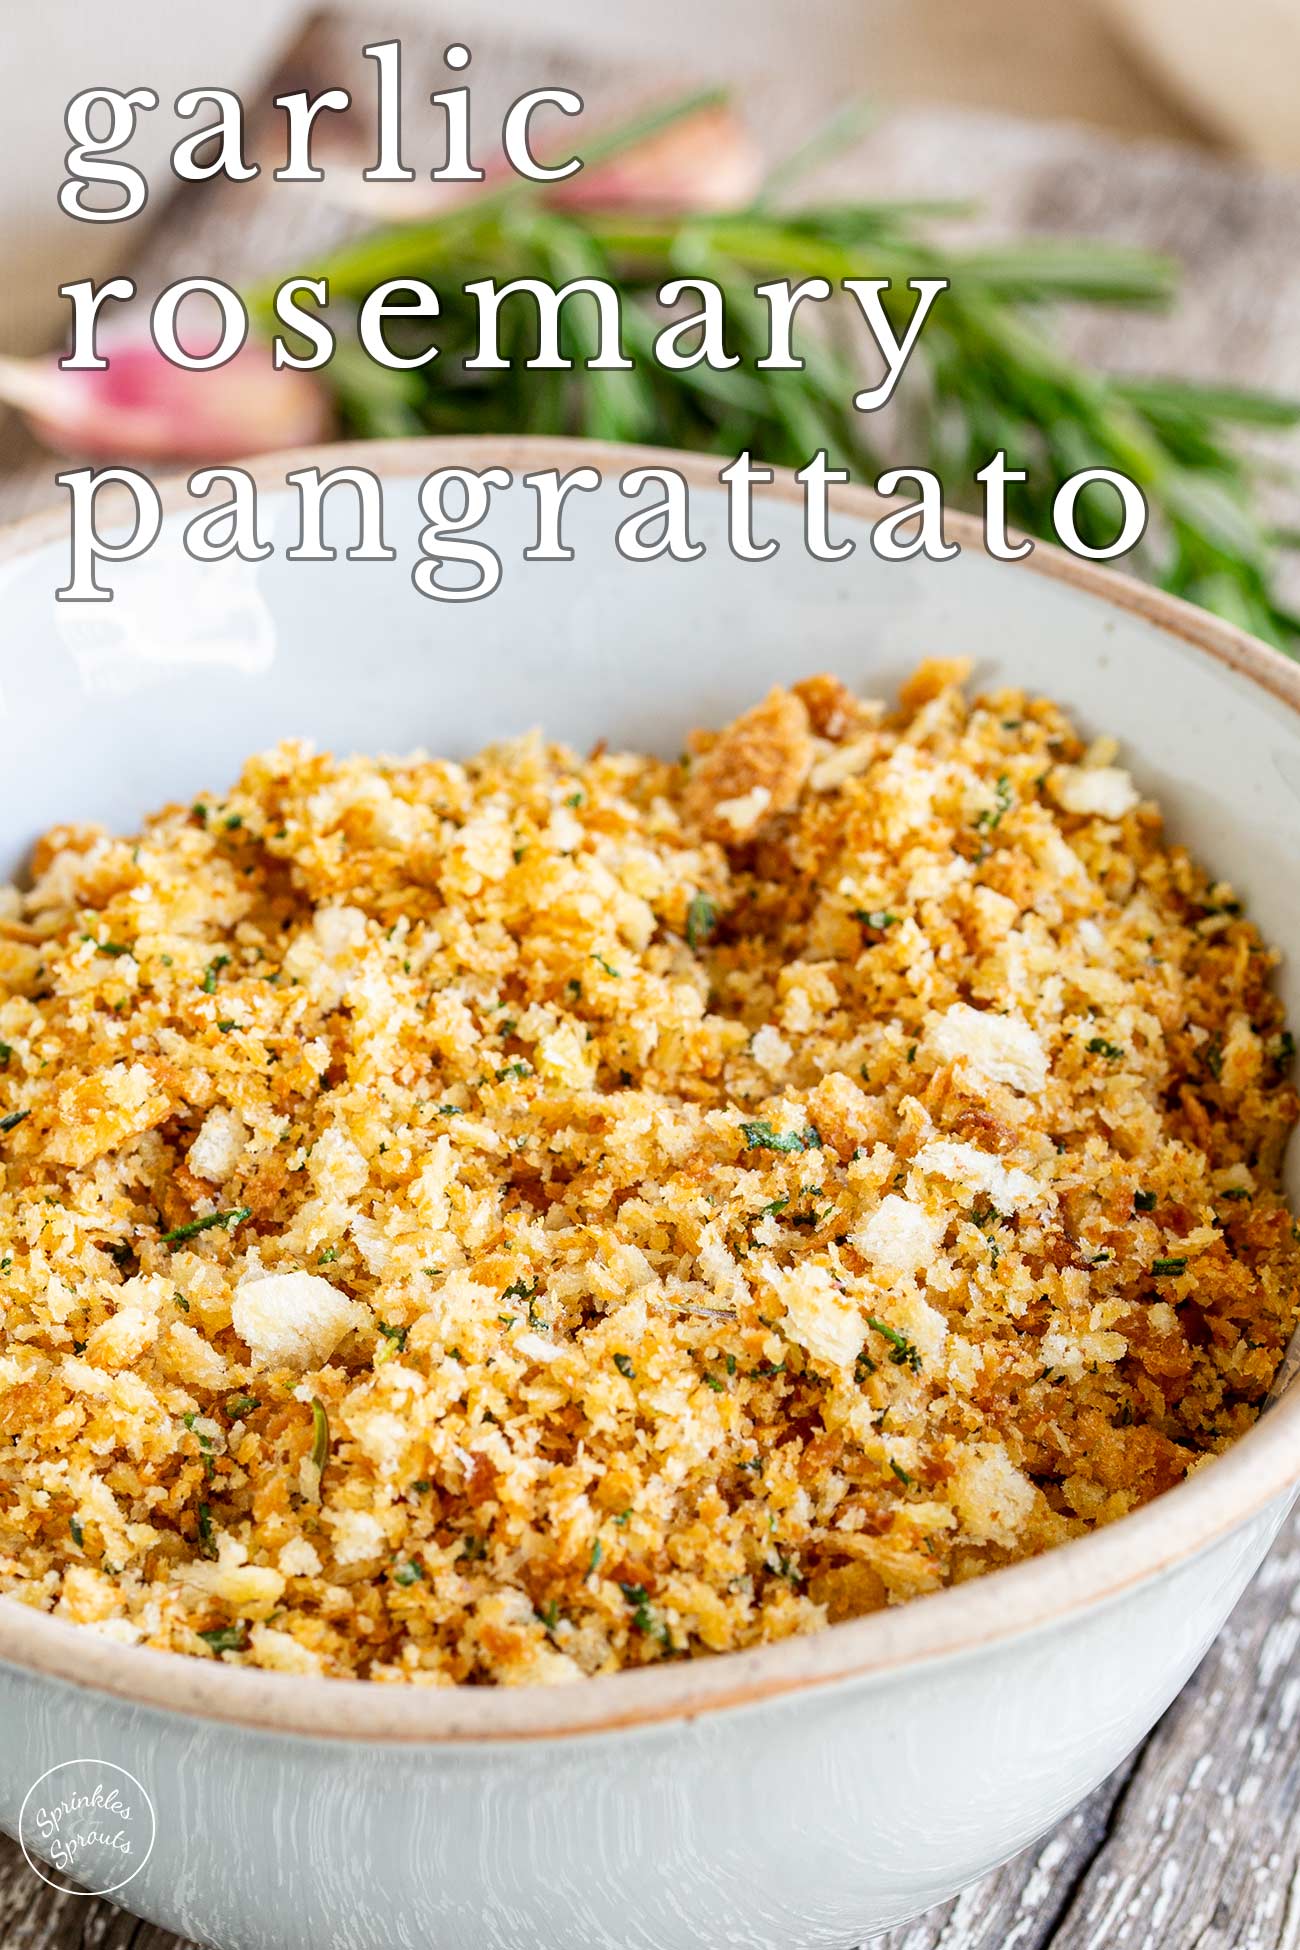 pin image: Pangrattato in a rustic white bowl with text overlaid